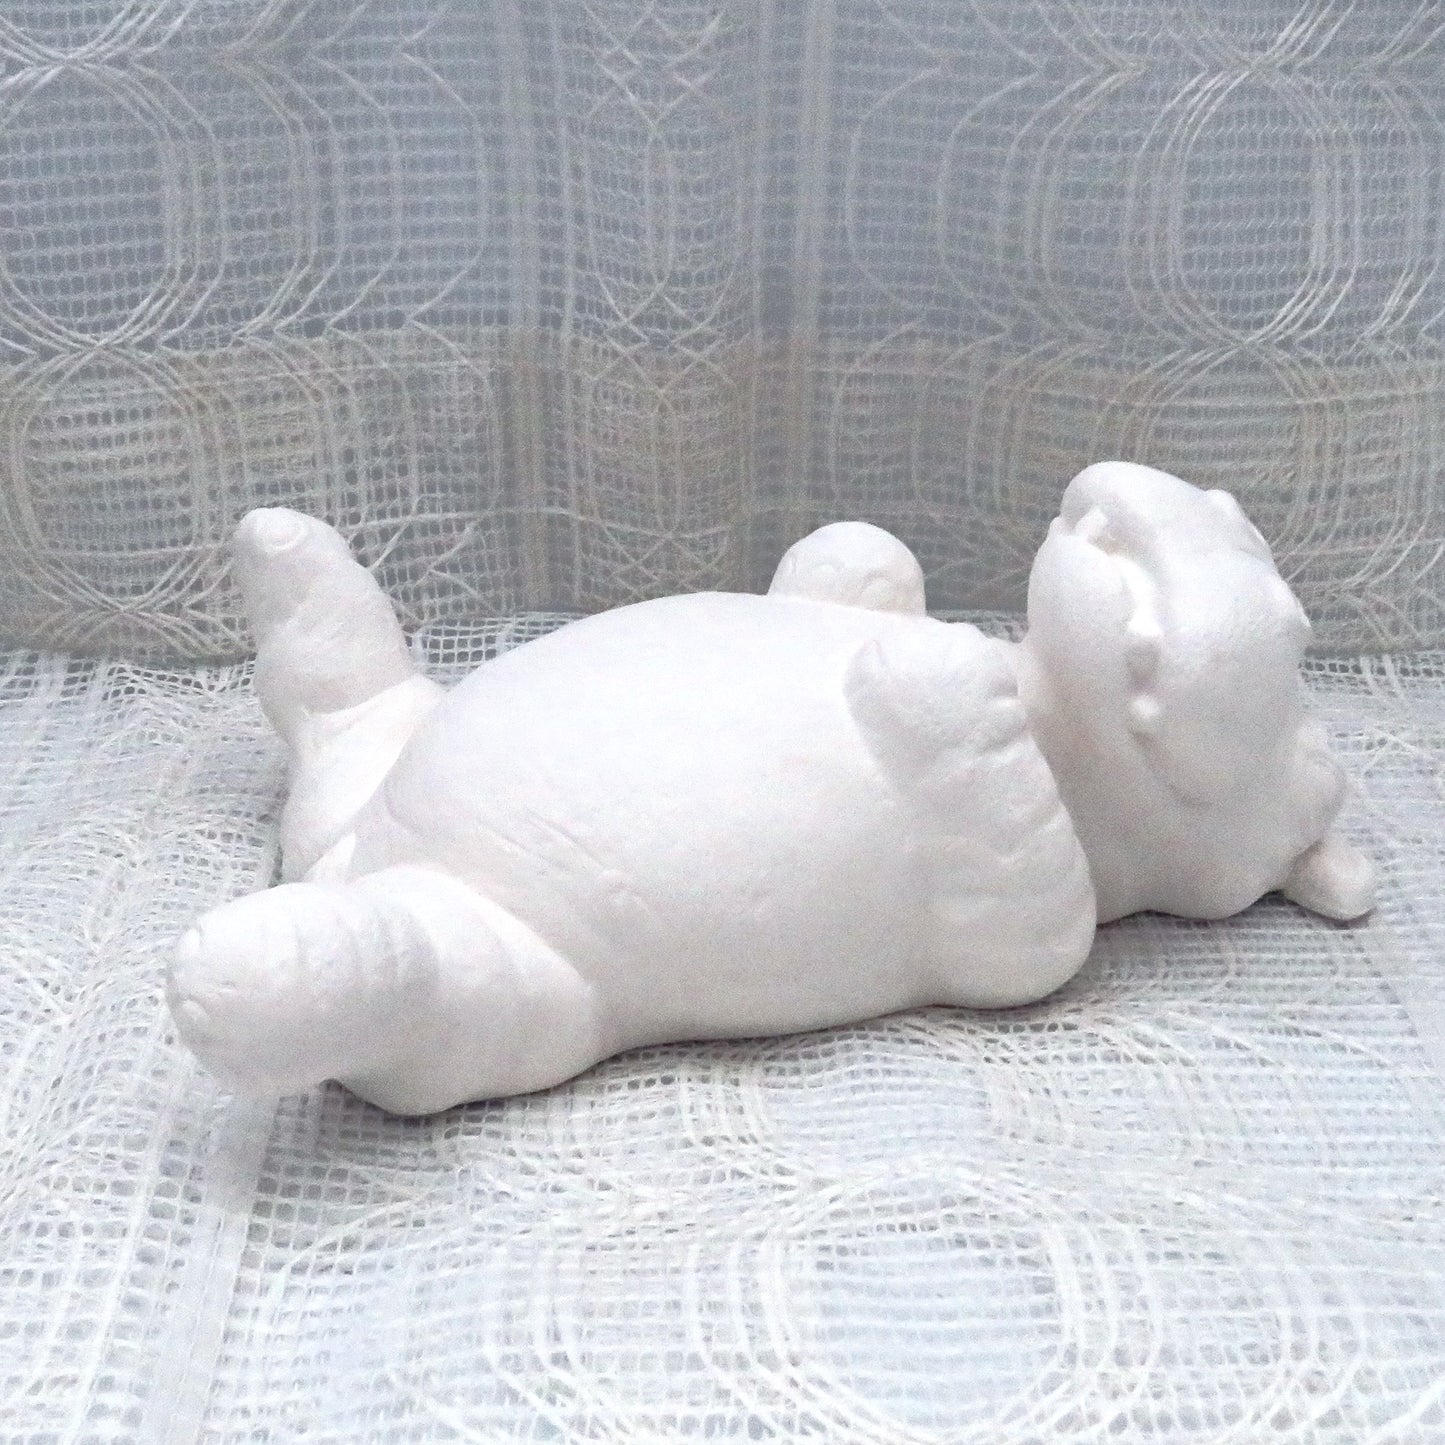 Unpainted Ceramic Bisque Hippo on Back Figurine, Ready to Paint Ceramic Hippo Statue